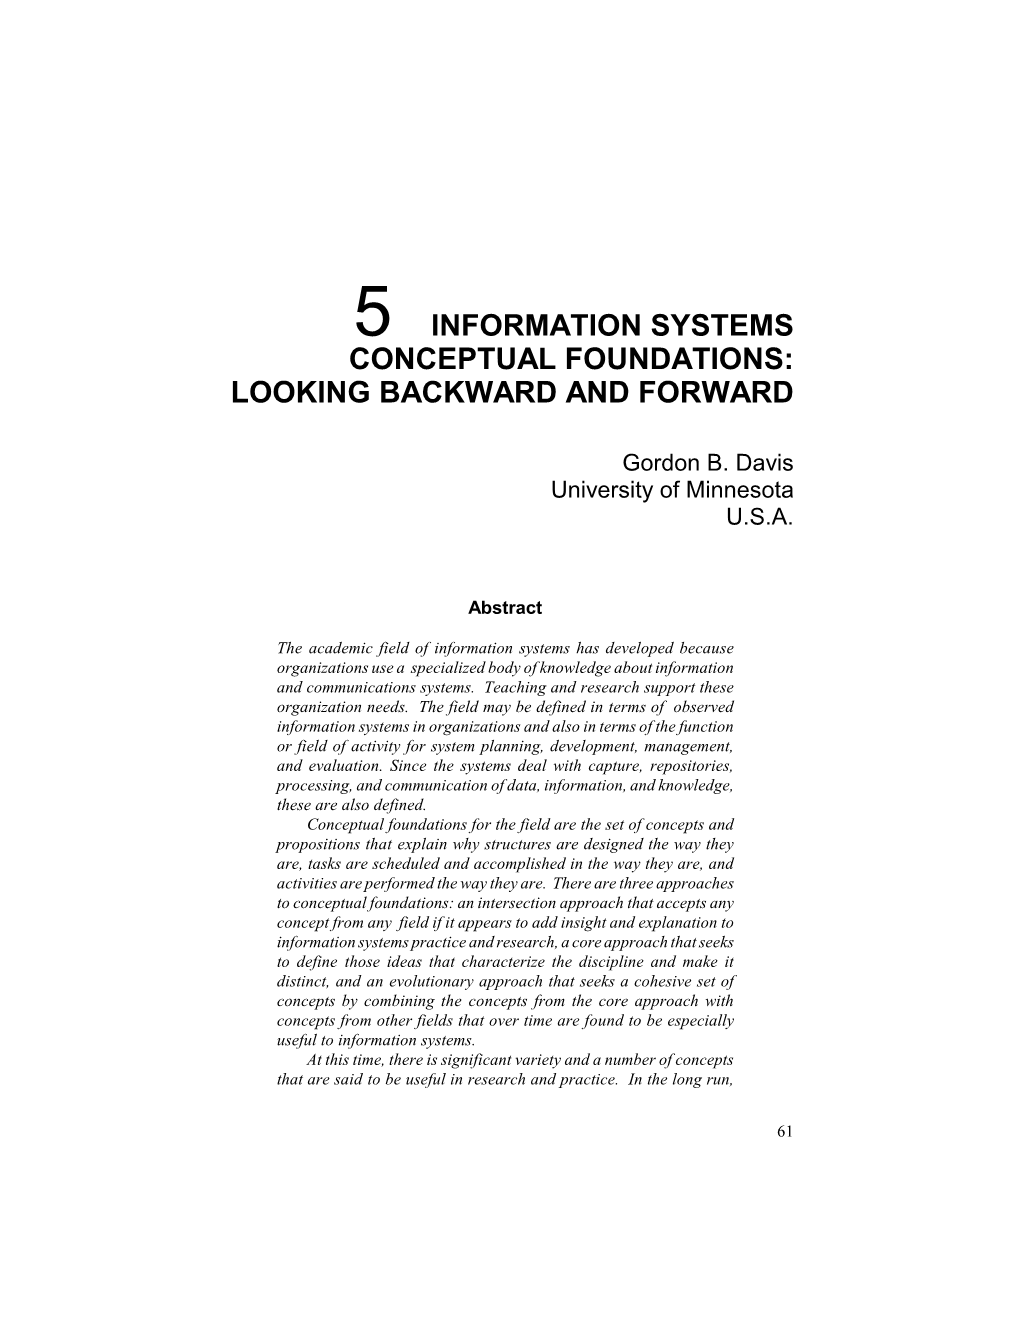 Information Systems Conceptual Foundations: Looking Backward and Forward